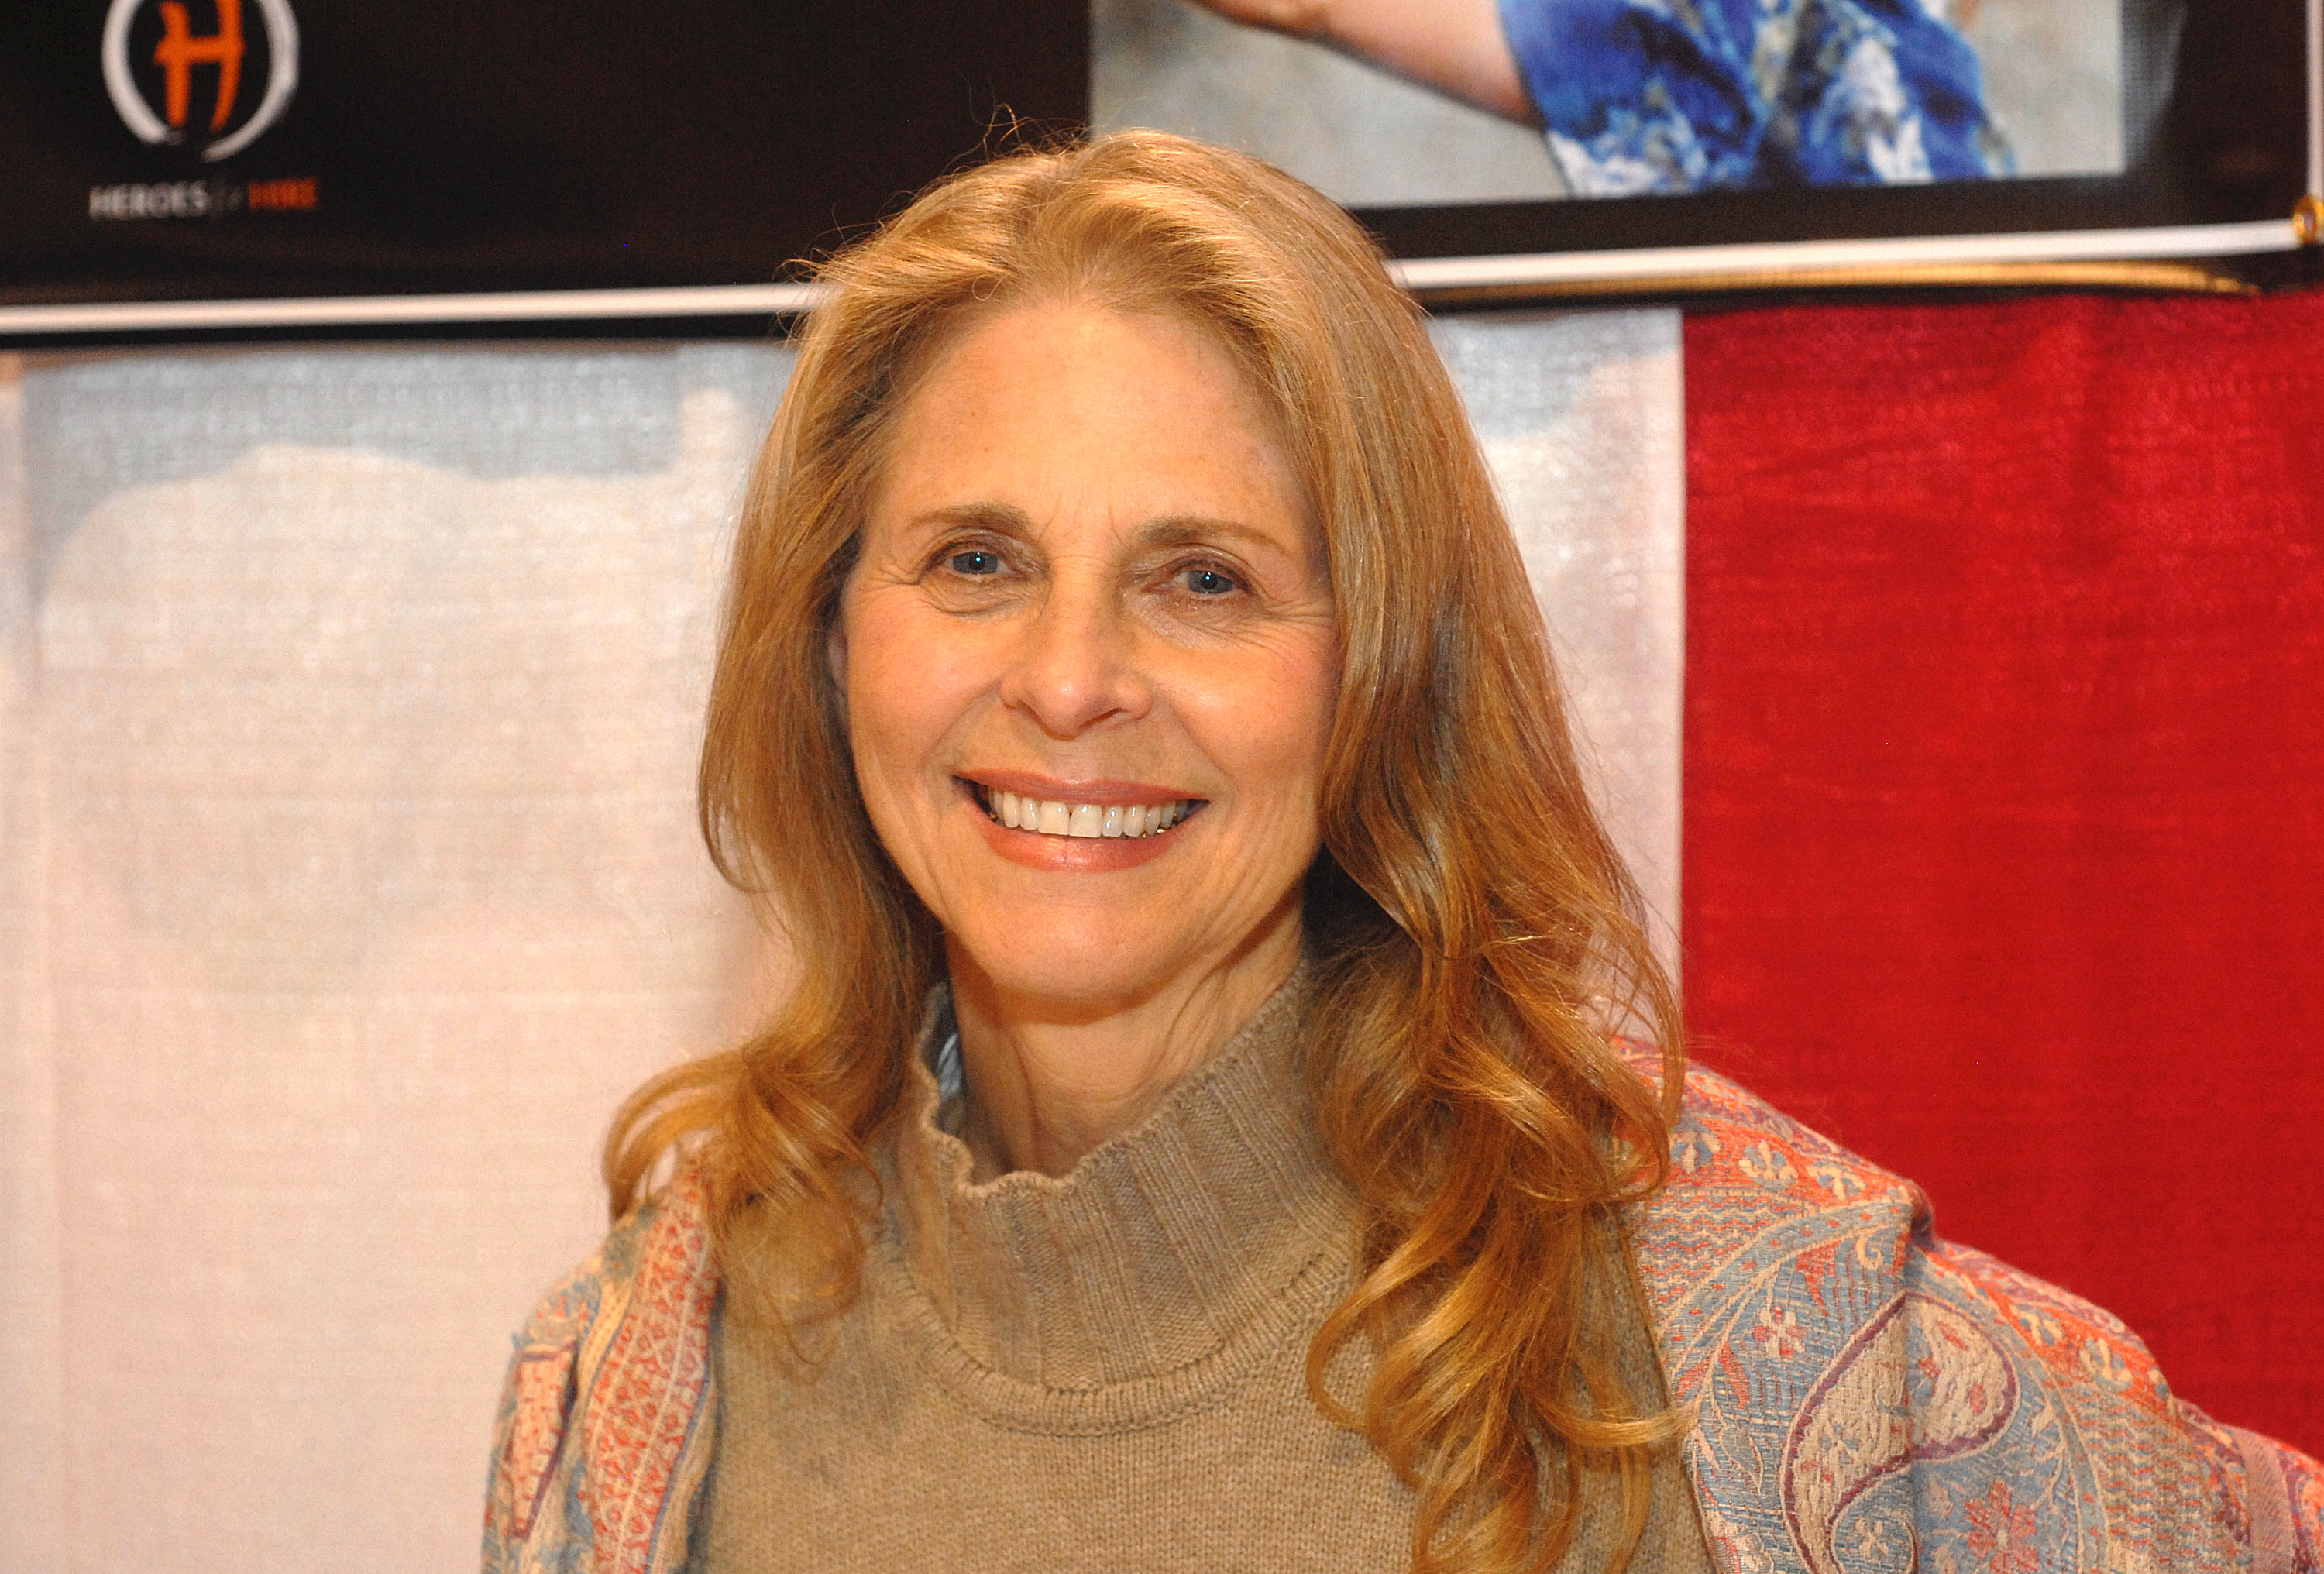 https://www.closerweekly.com/wp-content/uploads/2018/02/lindsay-wagner.jpg?fit=3000%2C2032&quality=86&strip=all